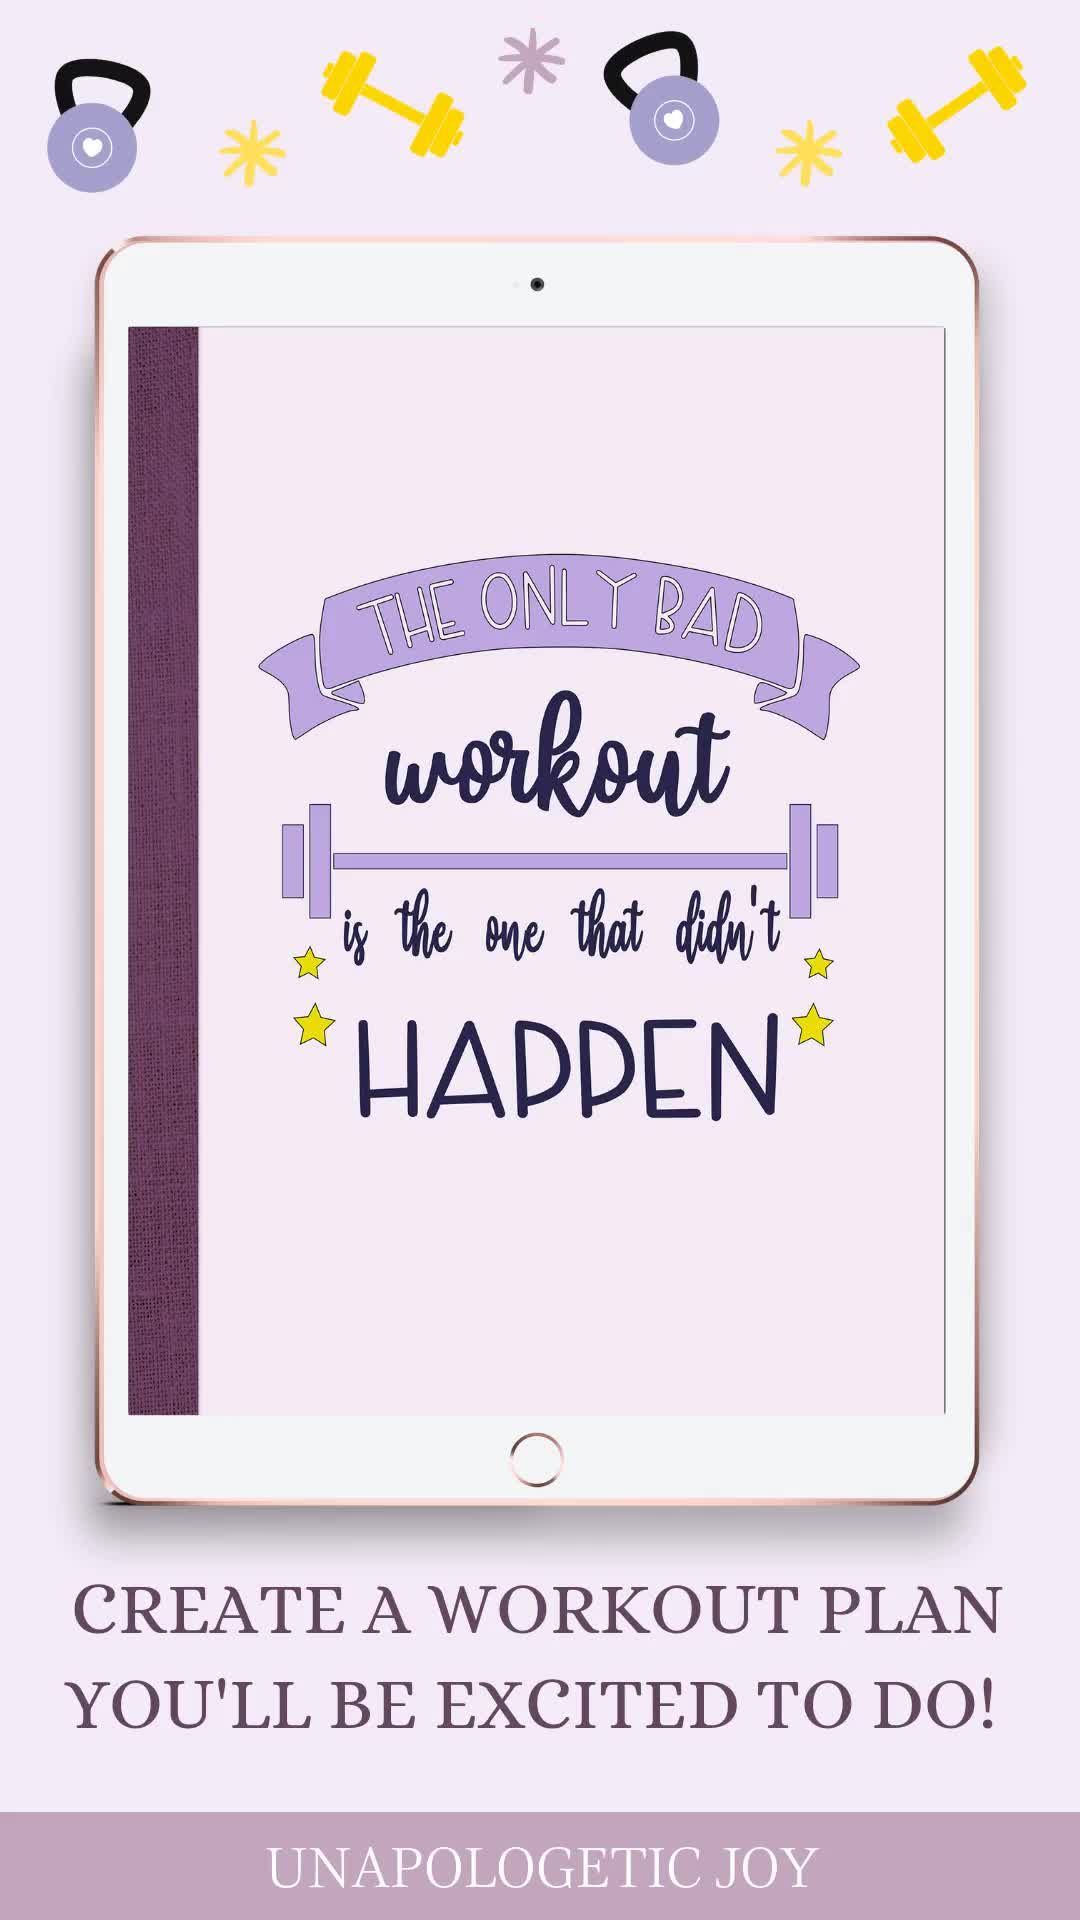 No Bad Workout Digital Fitness Planner - No Bad Workout Digital Fitness Planner -   16 fitness Journal beginners ideas